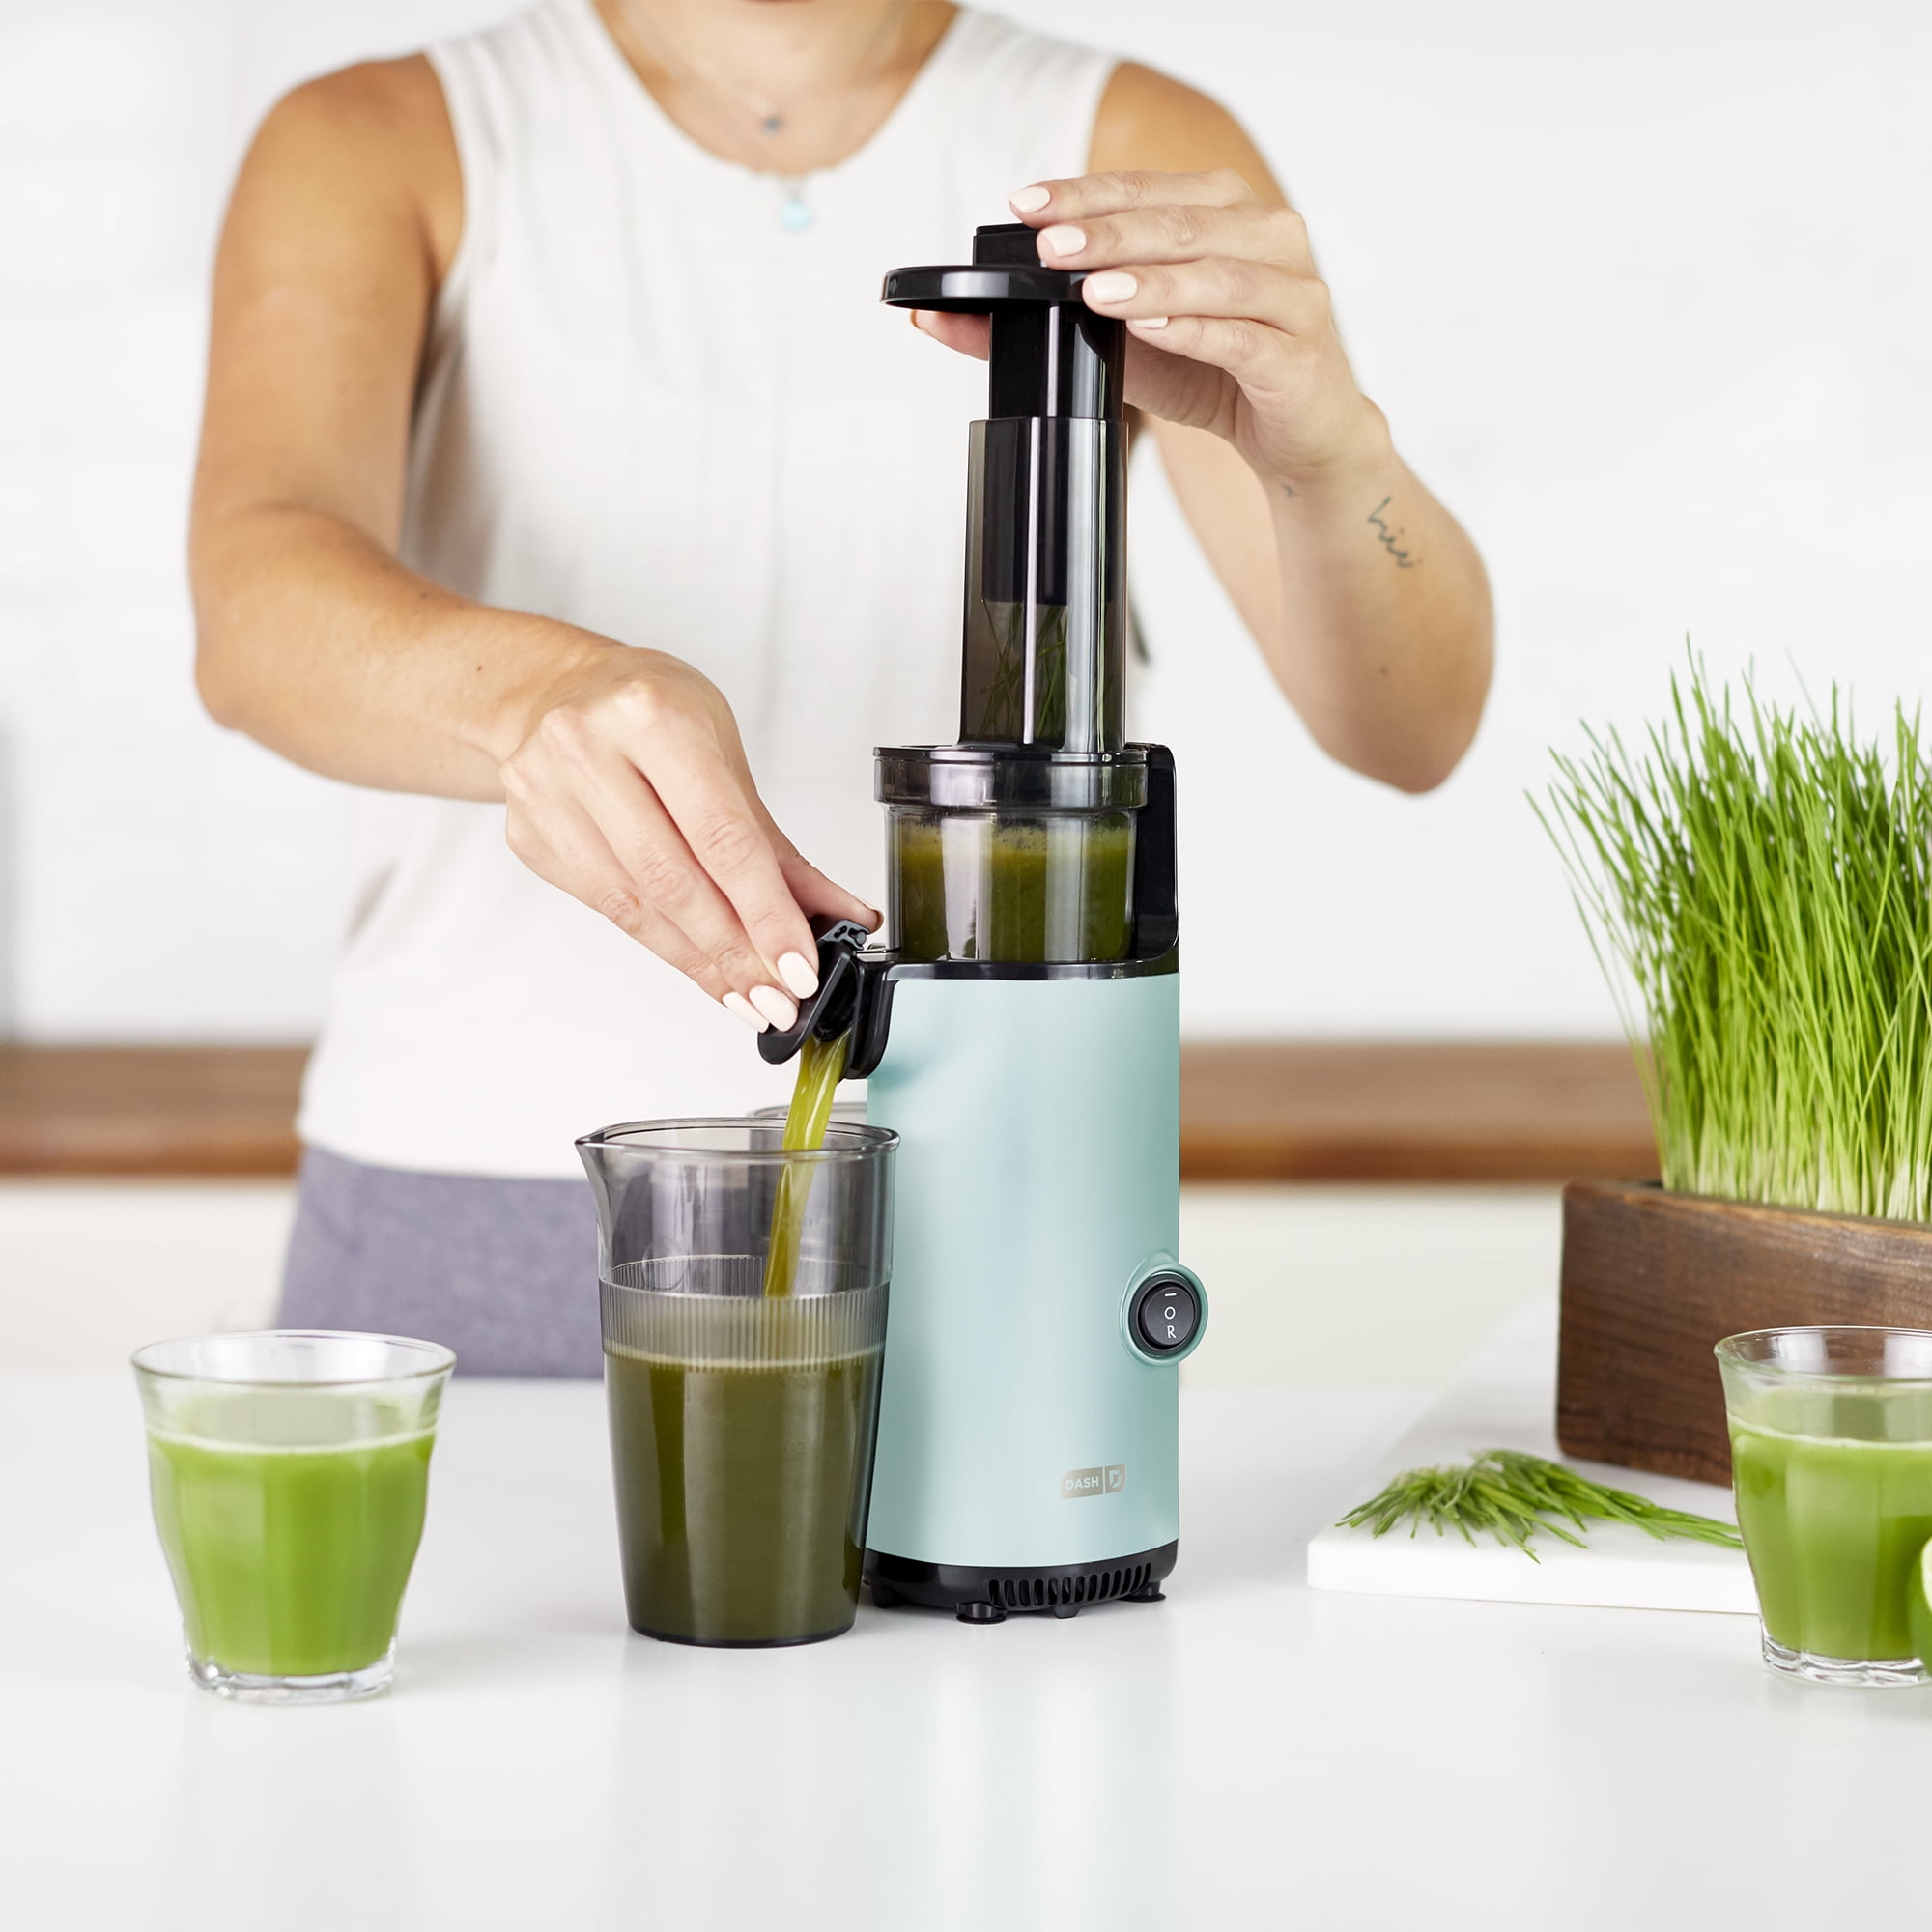 DASH Compact Slow Juicer, Easy to Clean Cold Press Juicer with Brush, Pulp Measuring Cup and Juice Recipe Guide - Aqua -